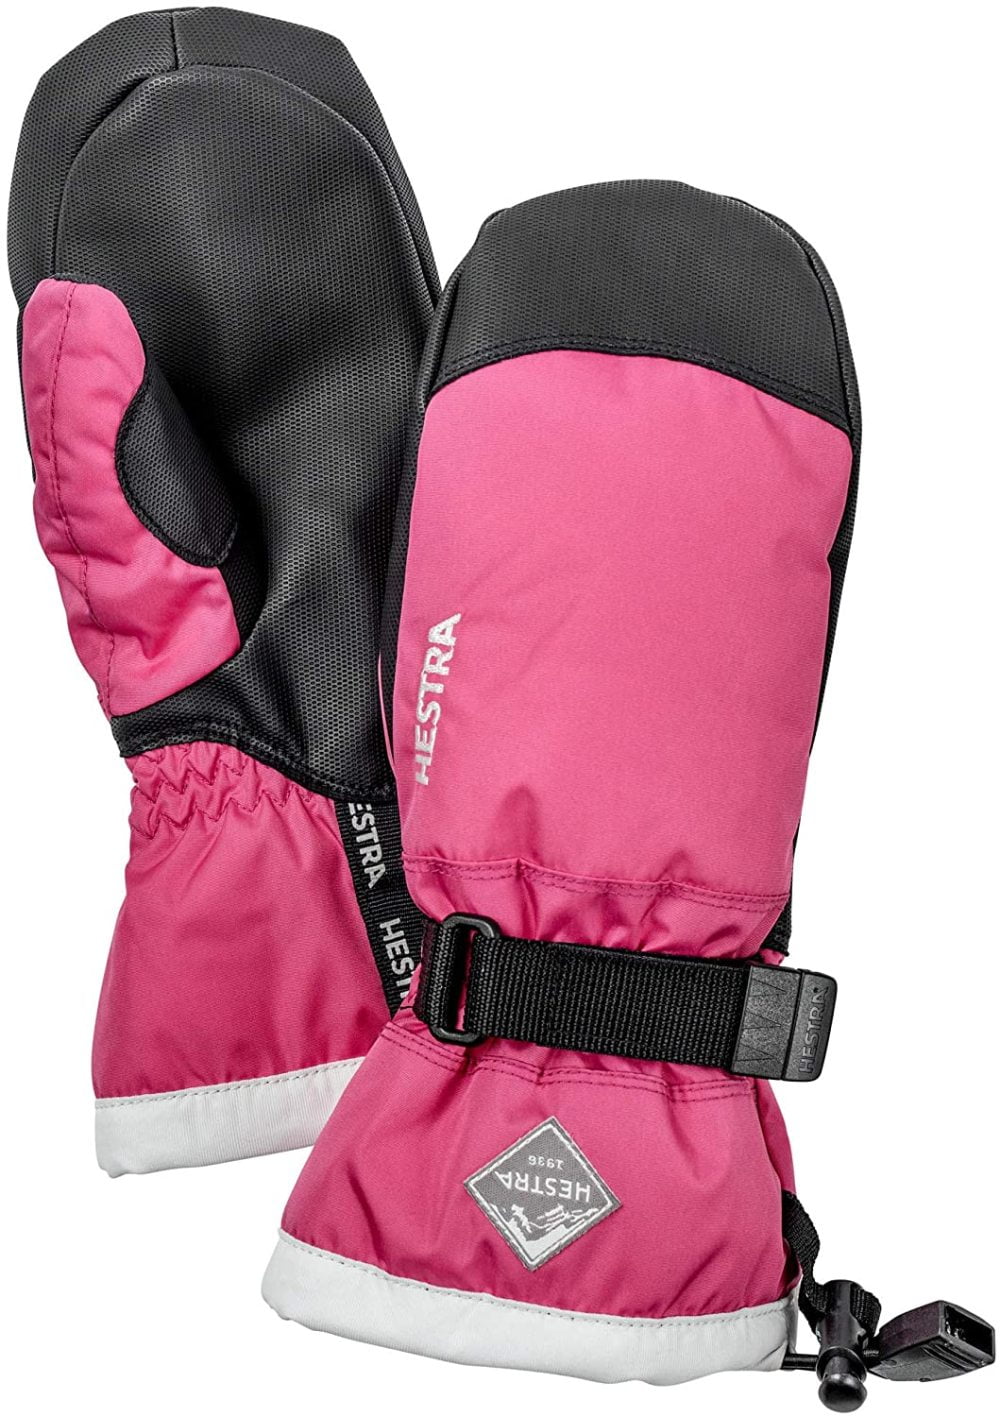 Snowboarding and Playing in The Snow Insulated Kids Glove for Skiing Waterproof Hestra Gauntlet CZone Junior Glove 